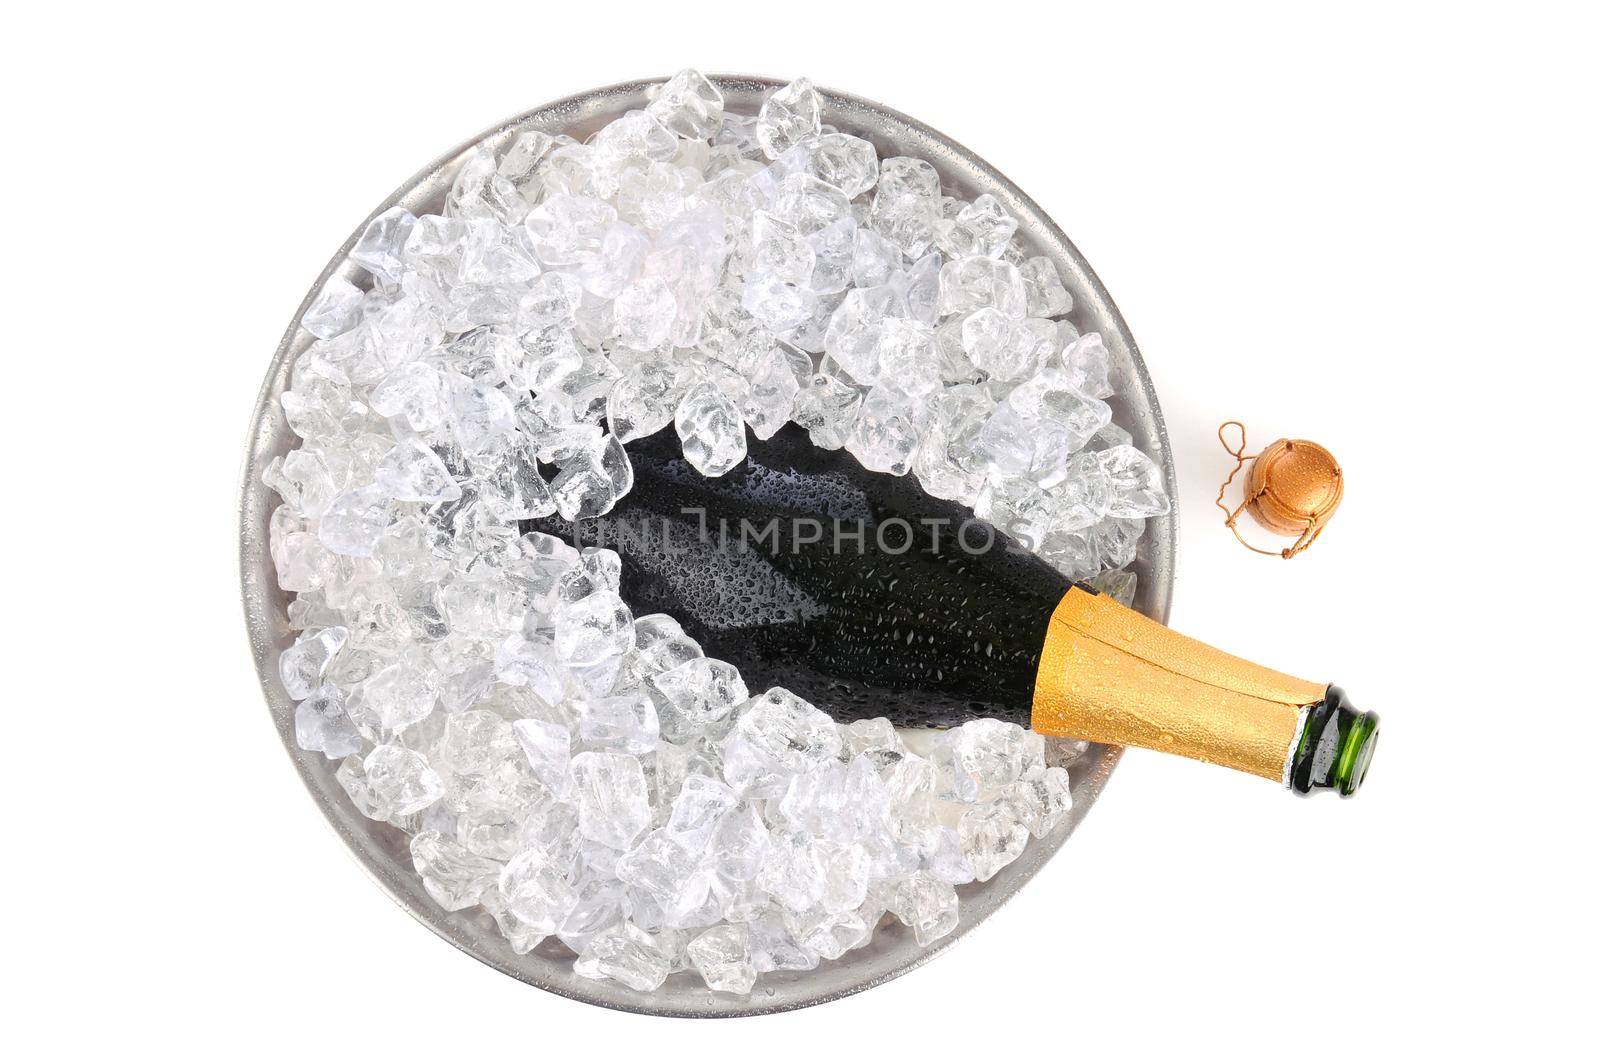 Overhead view of an open bottle of champagne in a metal ice bucket with condensation. Cork is on the  white background adjacent to the bottles neck.